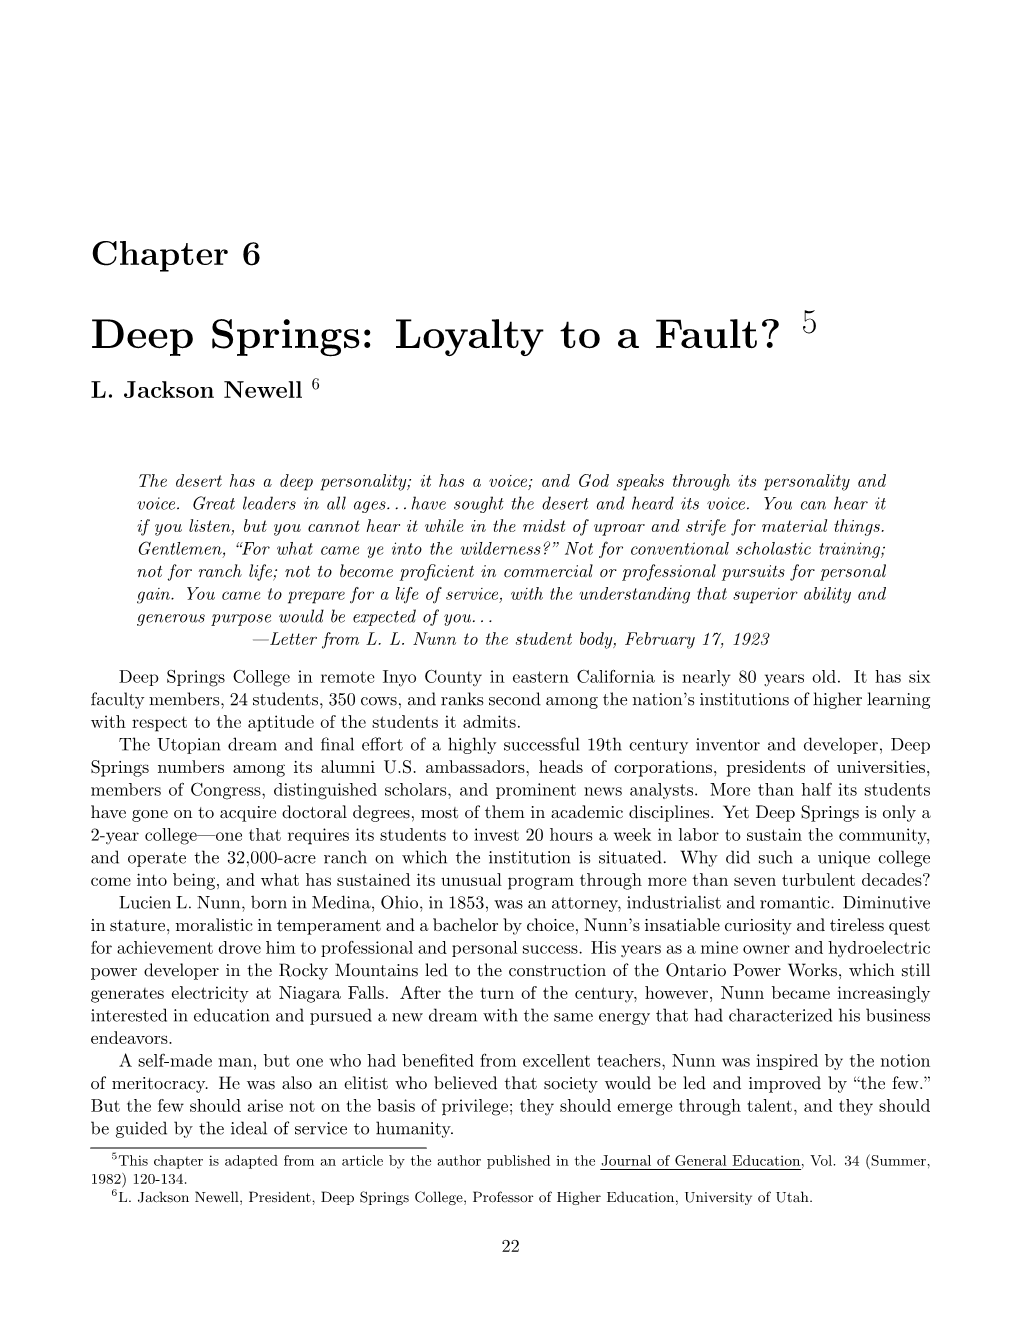 Deep Springs: Loyalty to a Fault? 5 L